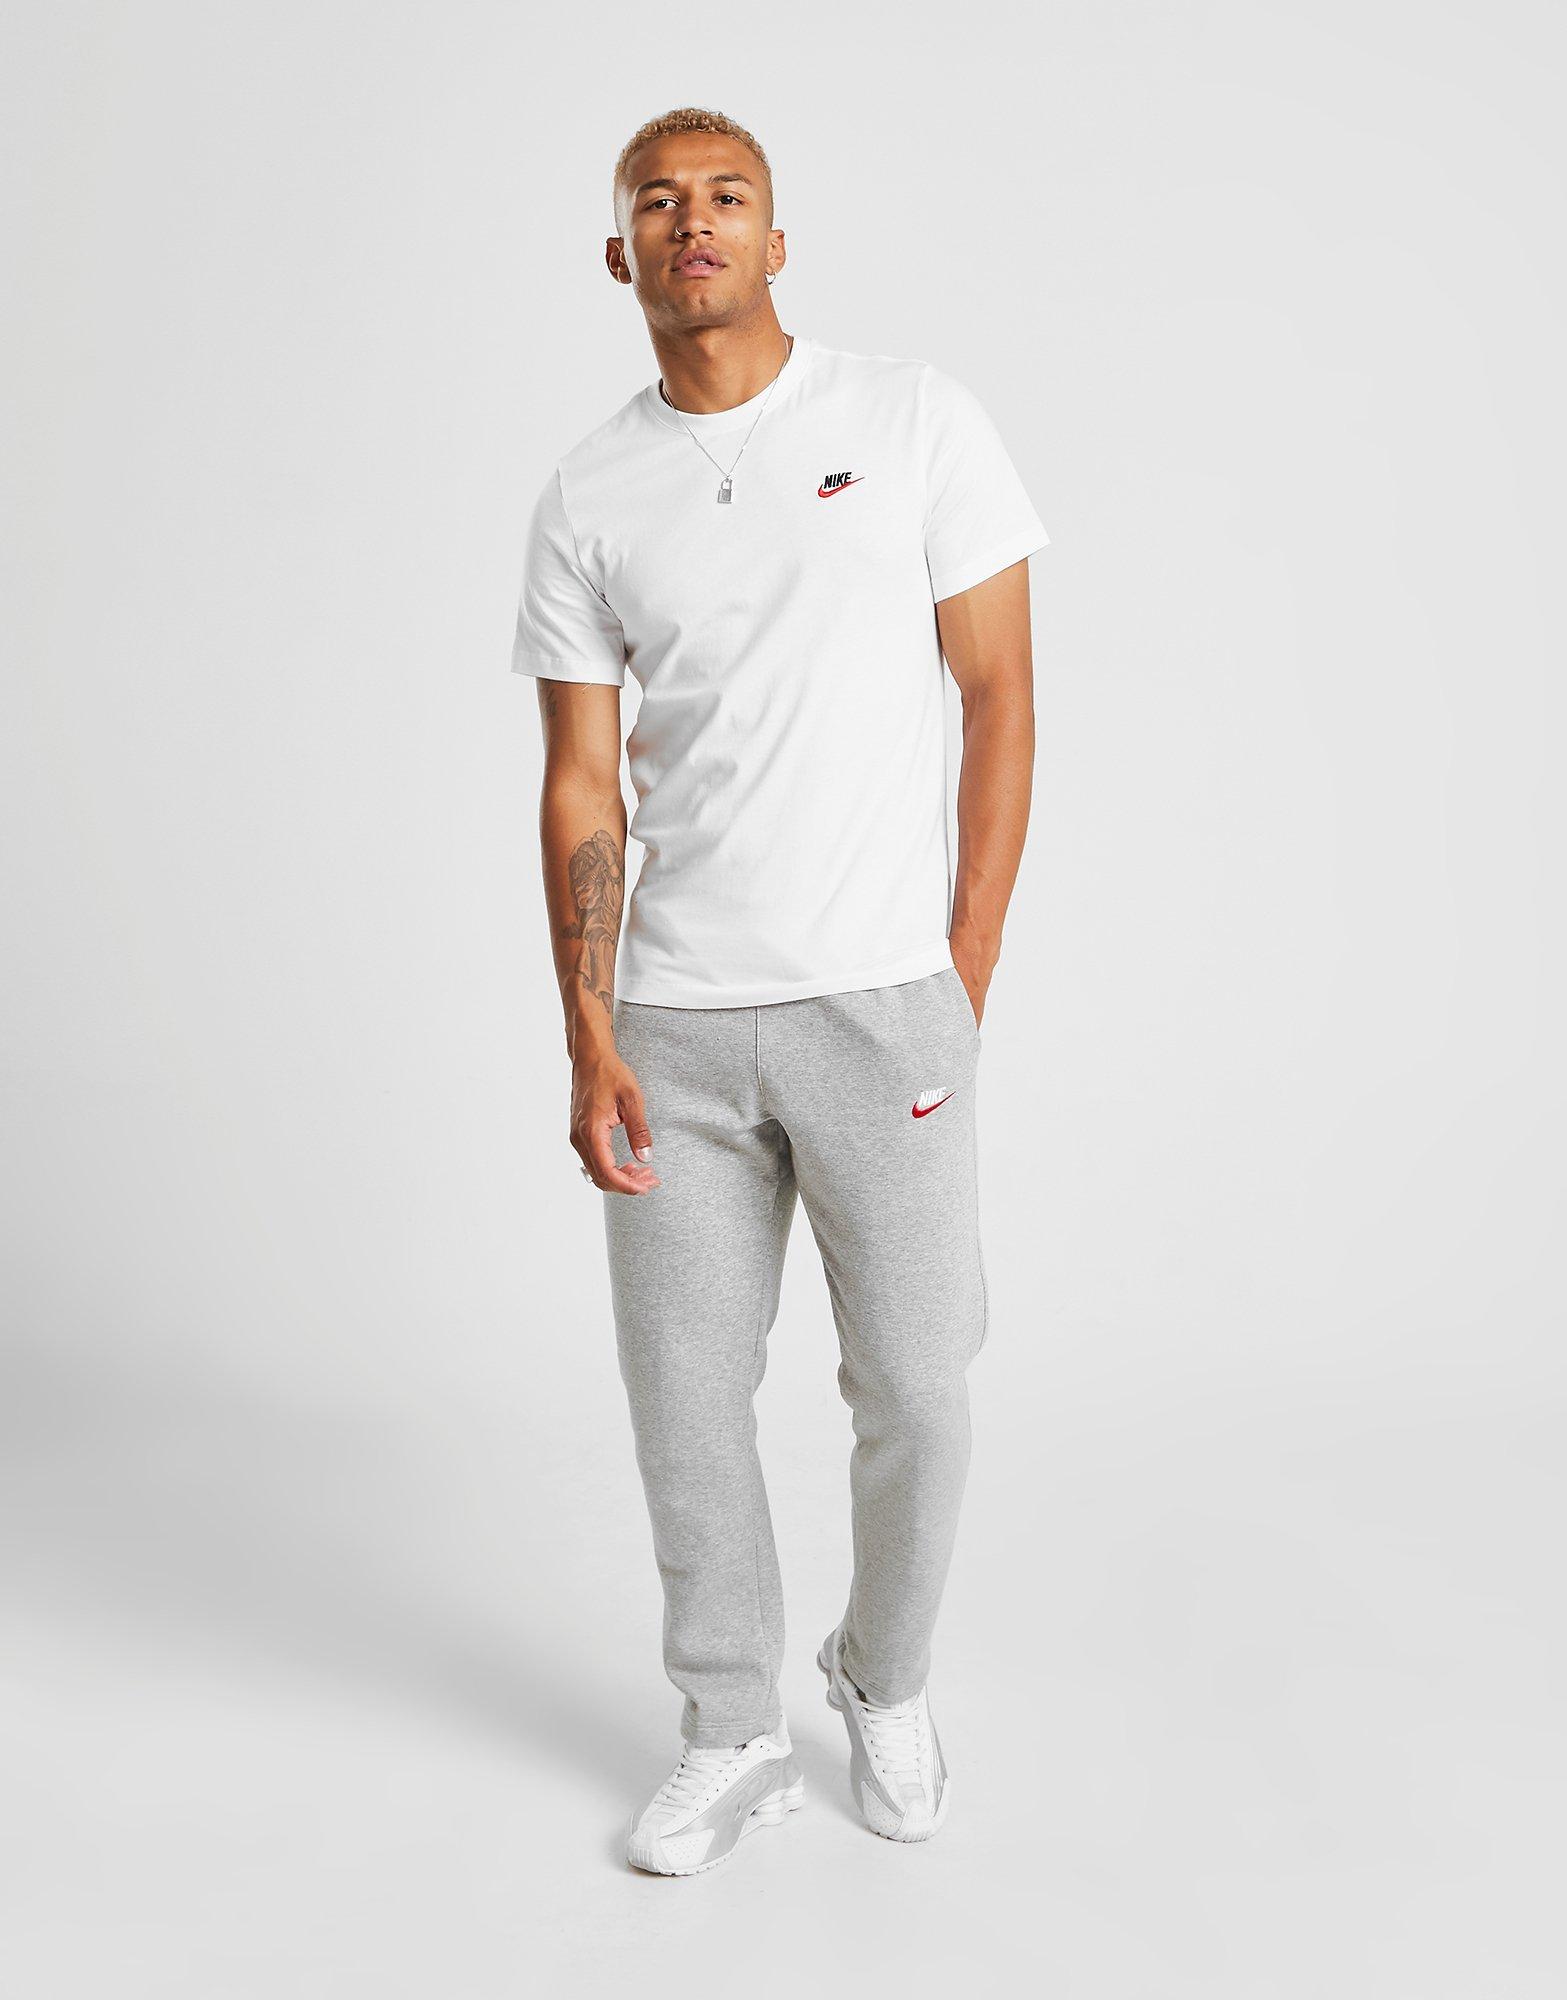 white nike top with red tick